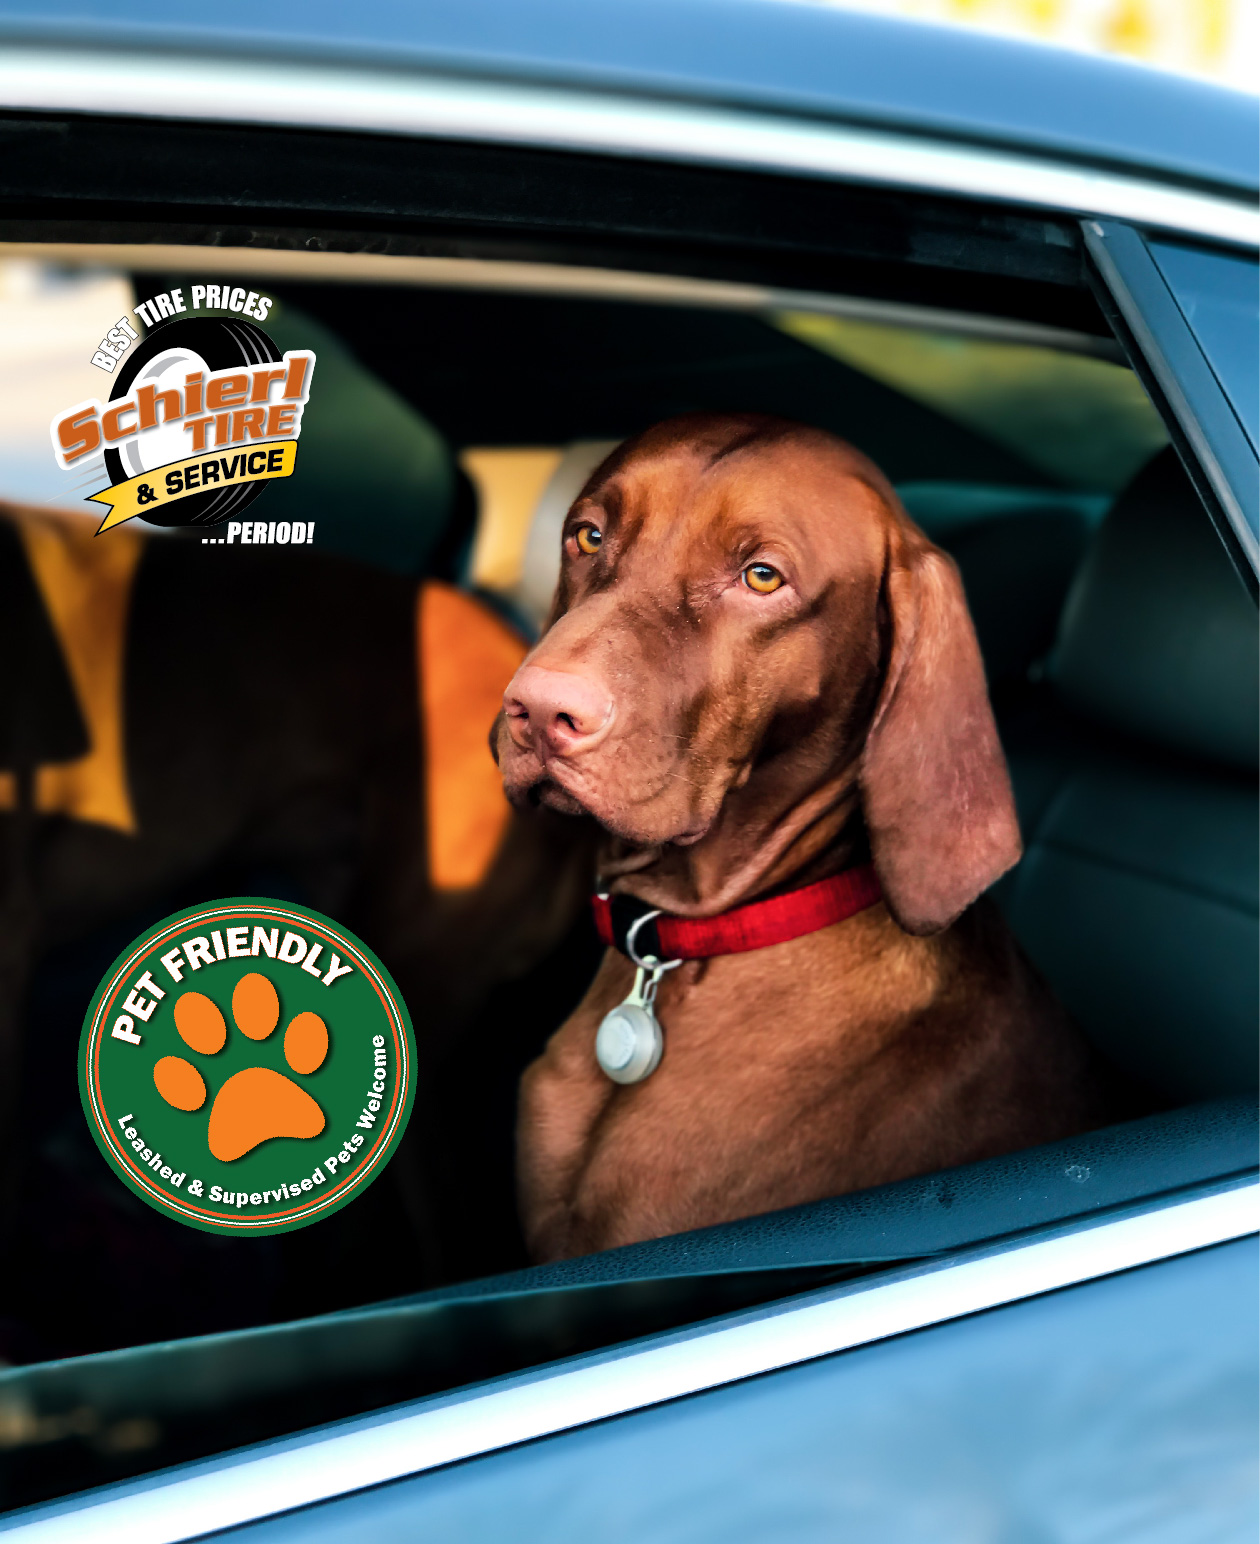 Items Every Dog Owner Should Keep in Their Car